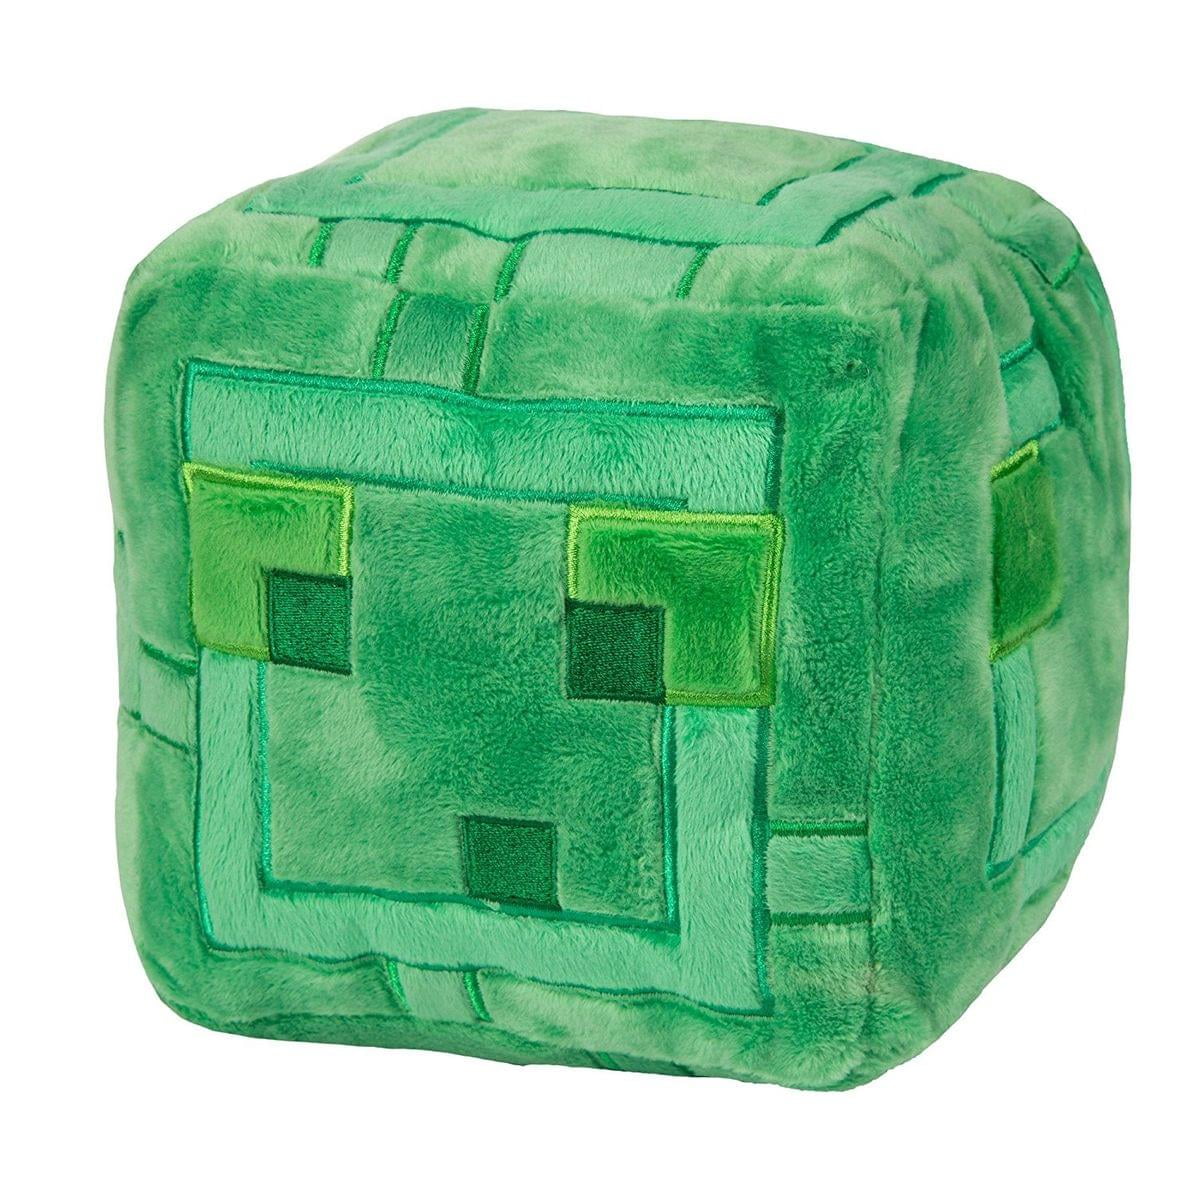 Official Jinx Minecraft Slime Cube Plush 9.5" Tall *New 